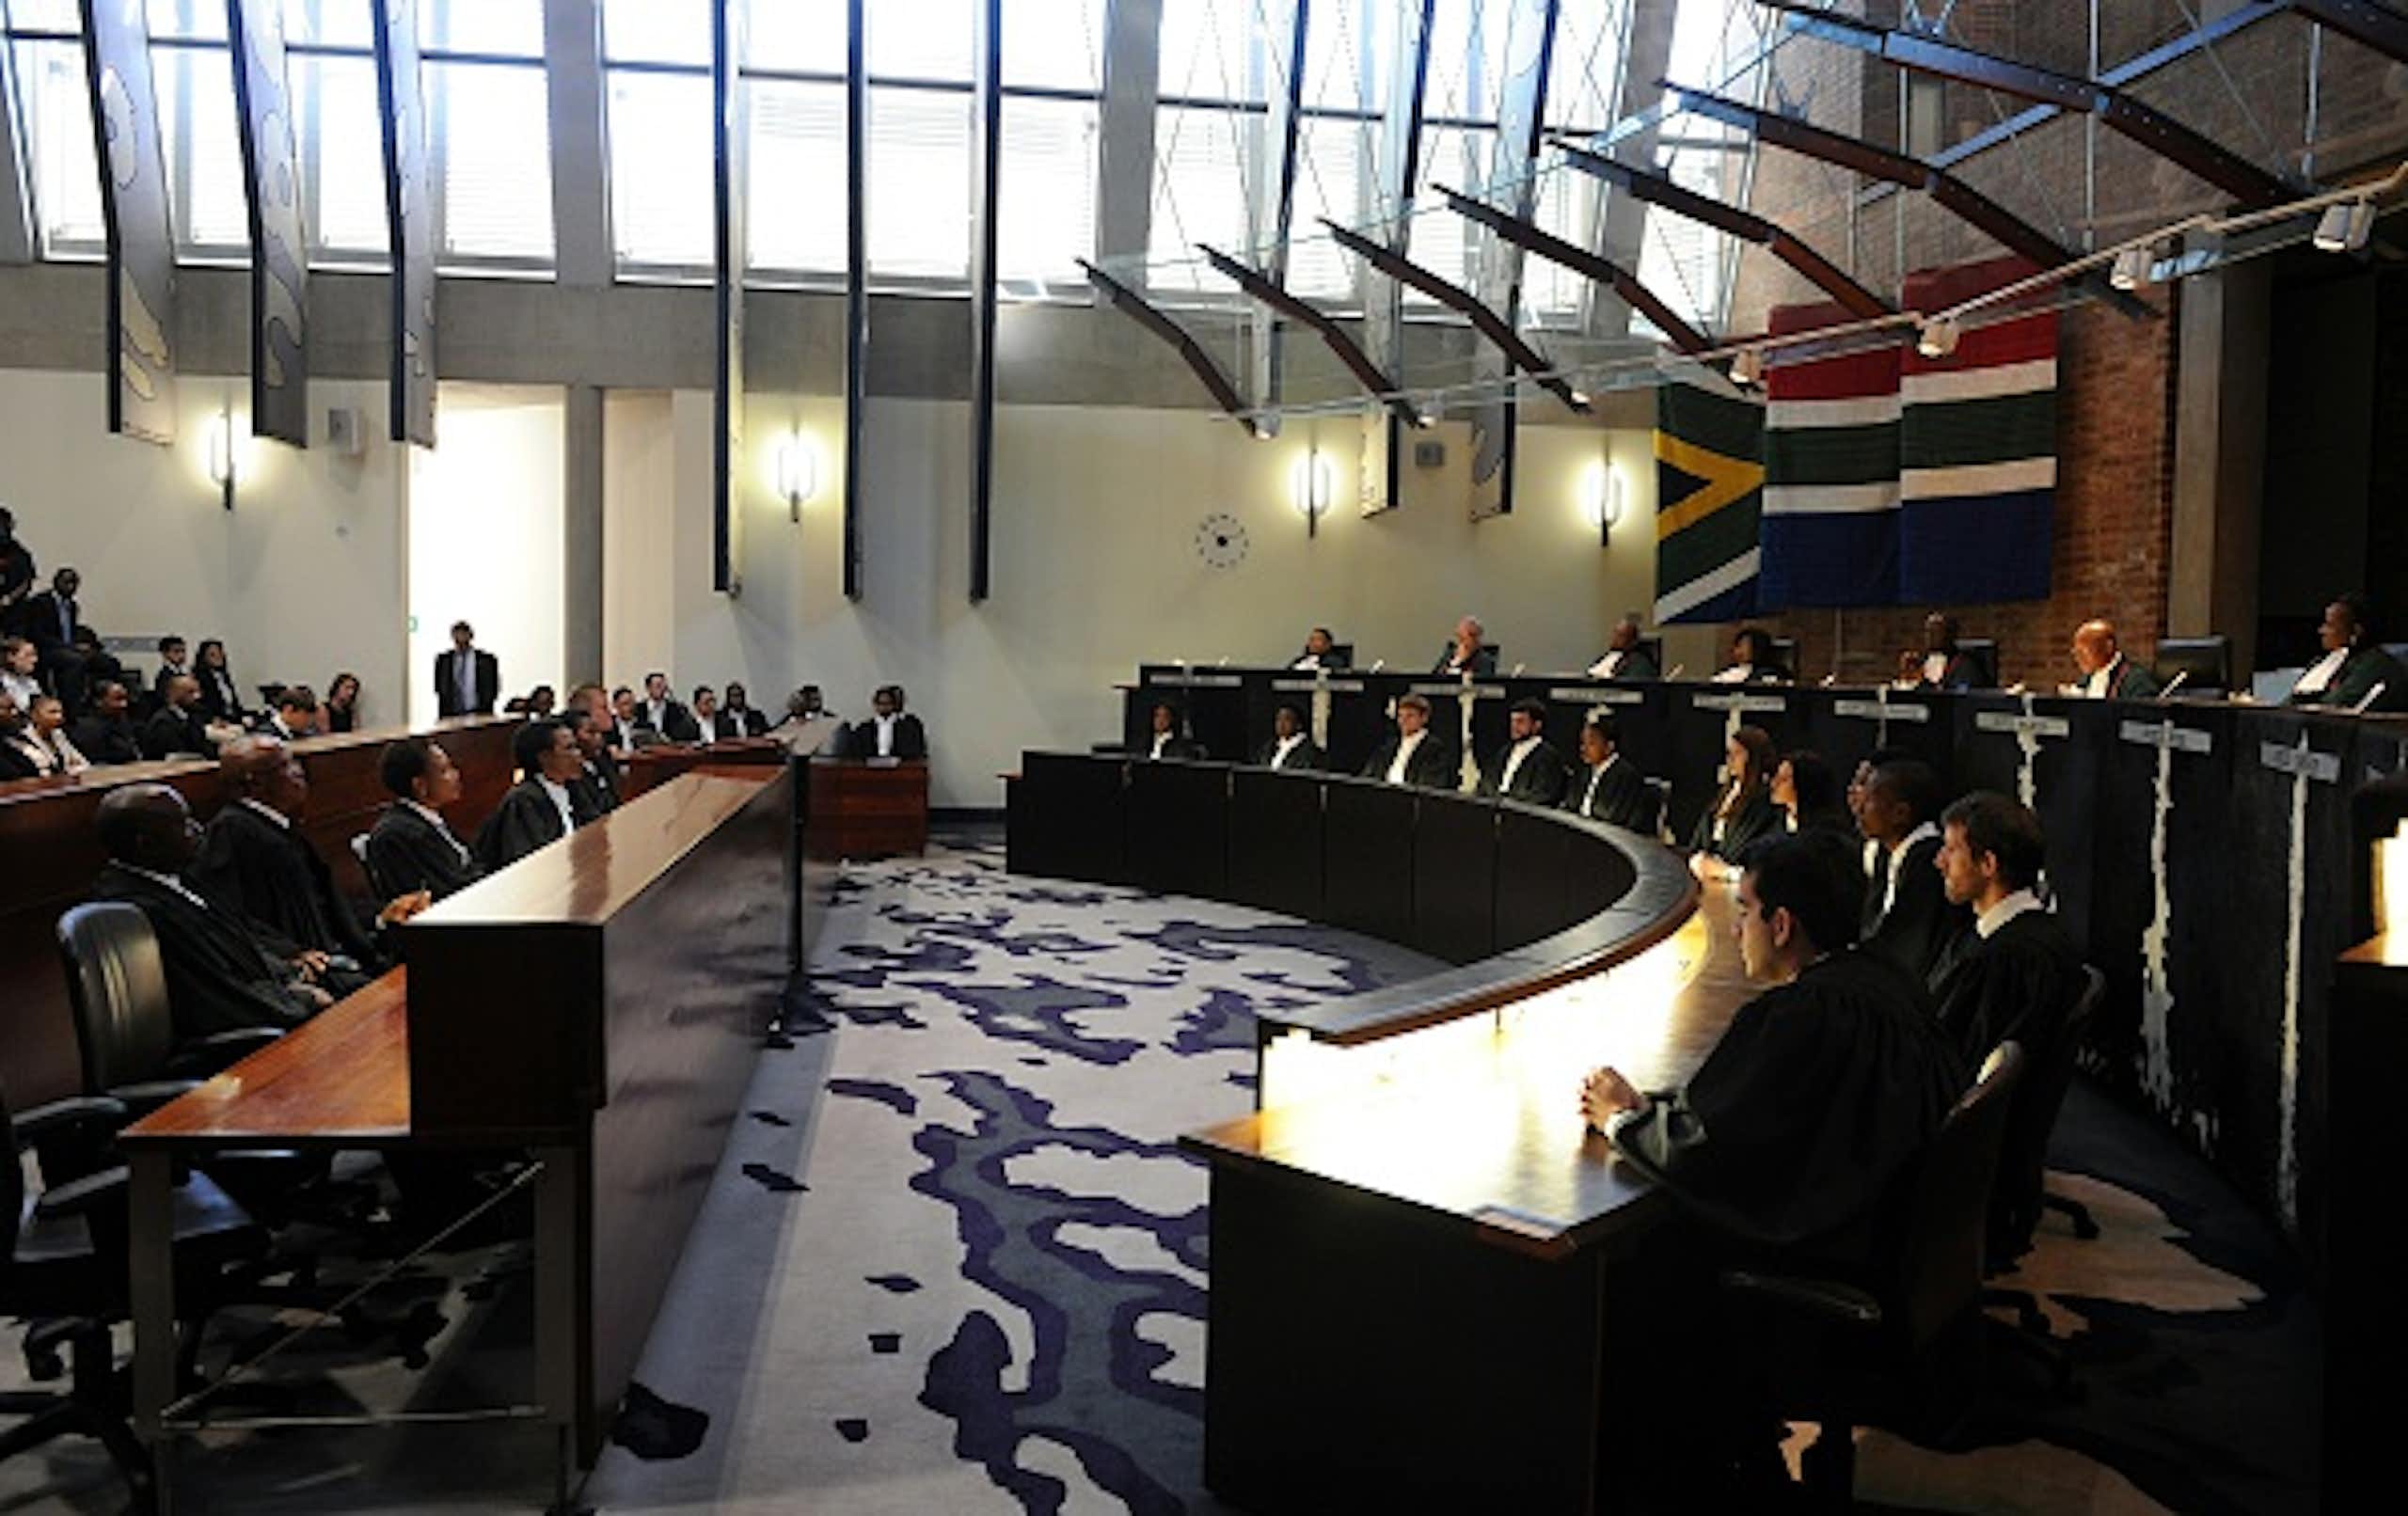 Interior of South Africa's Constitutional Court, with a row of judges and a row of clerks seated facing the courtroom.